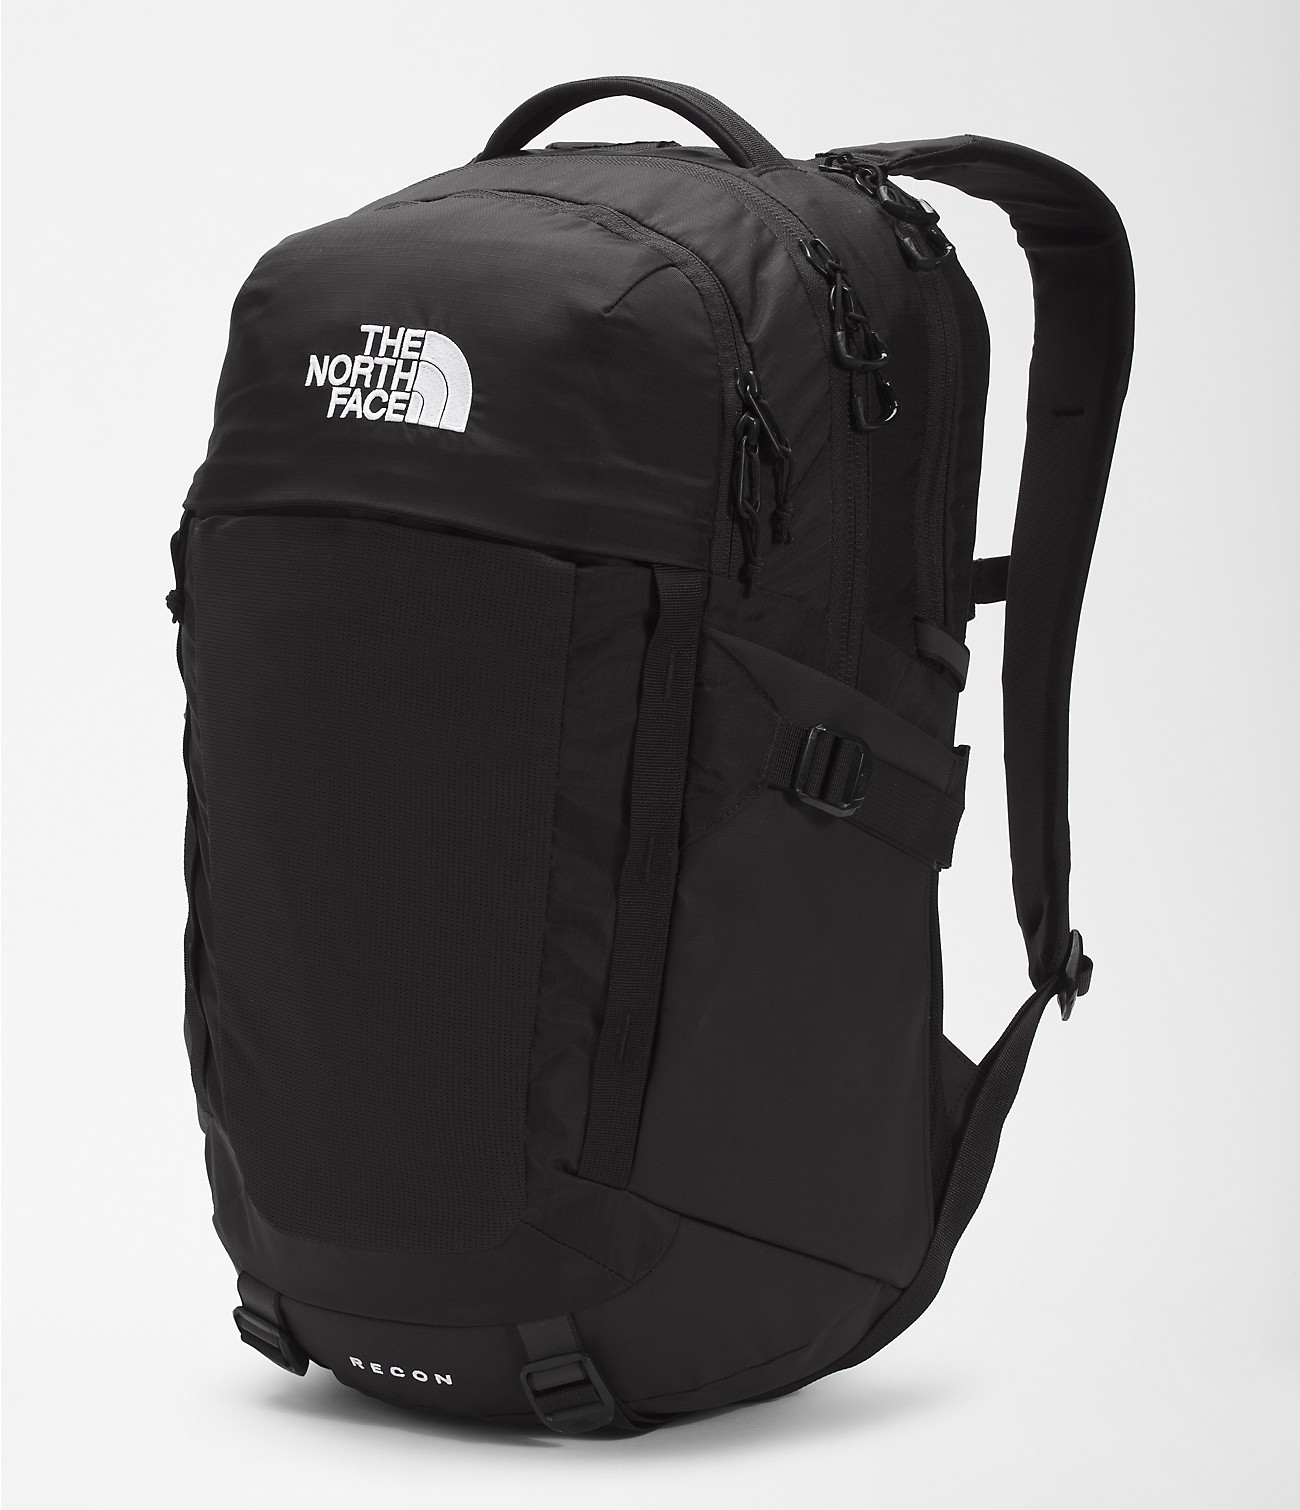 Unlock Wilderness' choice in the L.L.Bean Vs North Face comparison, the Recon Backpack by The North Face